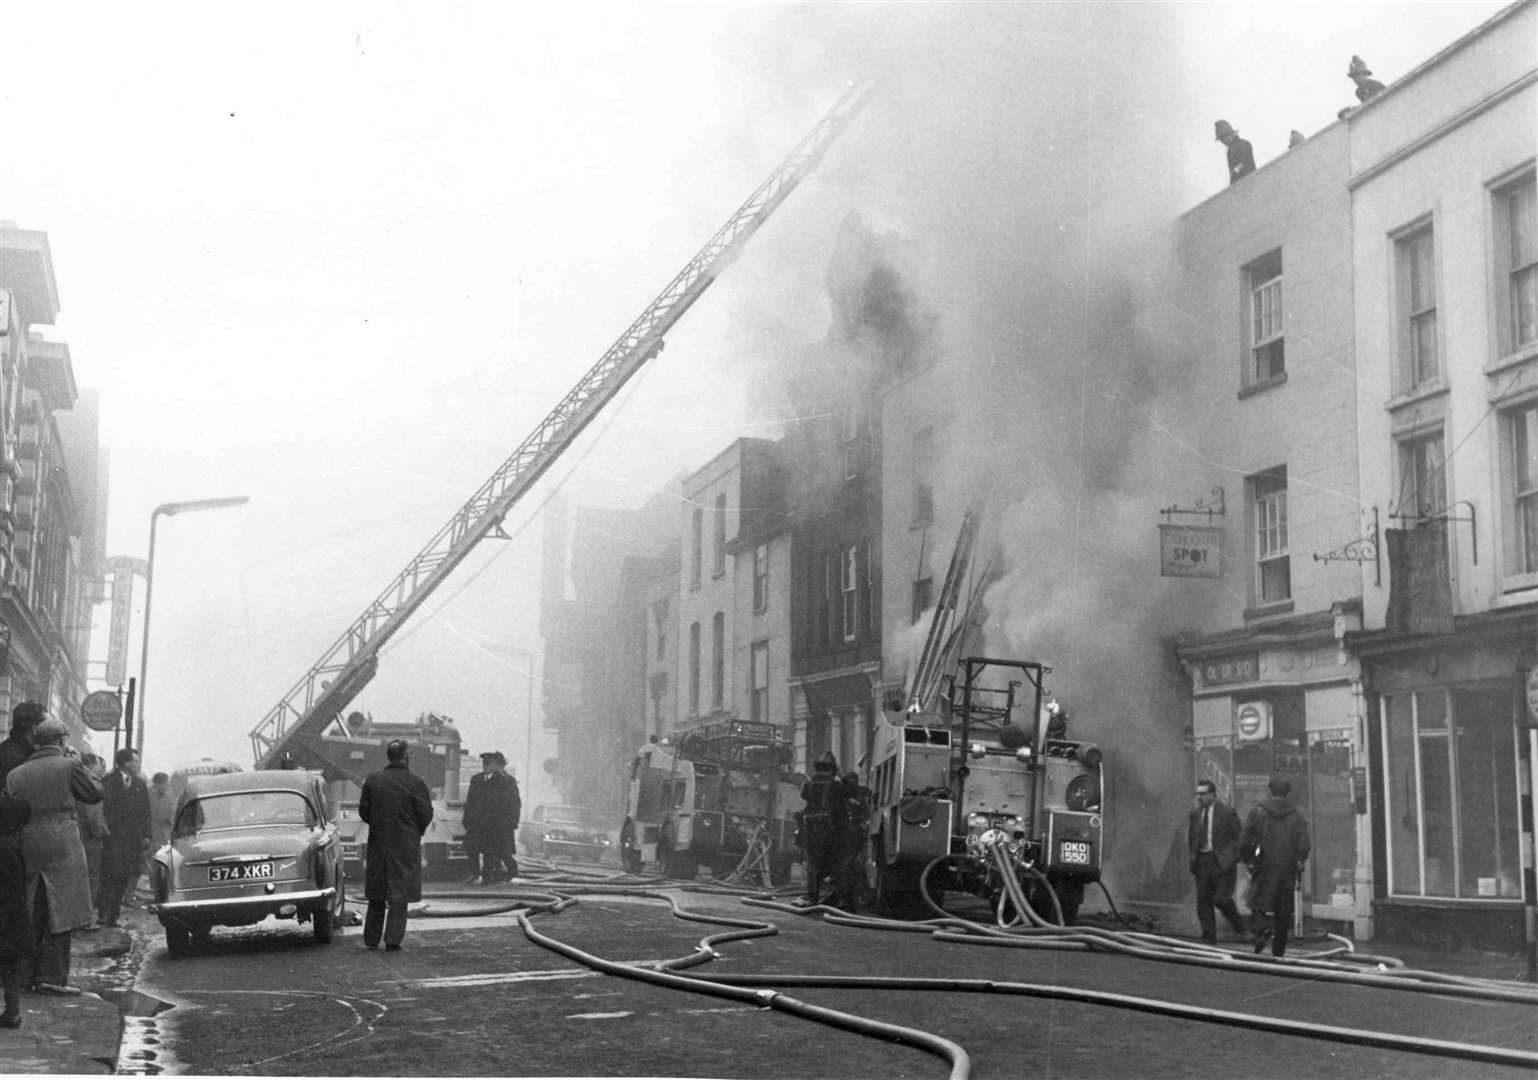 Fire at John Reed's shop in King Street, Maidstone, in January 1964